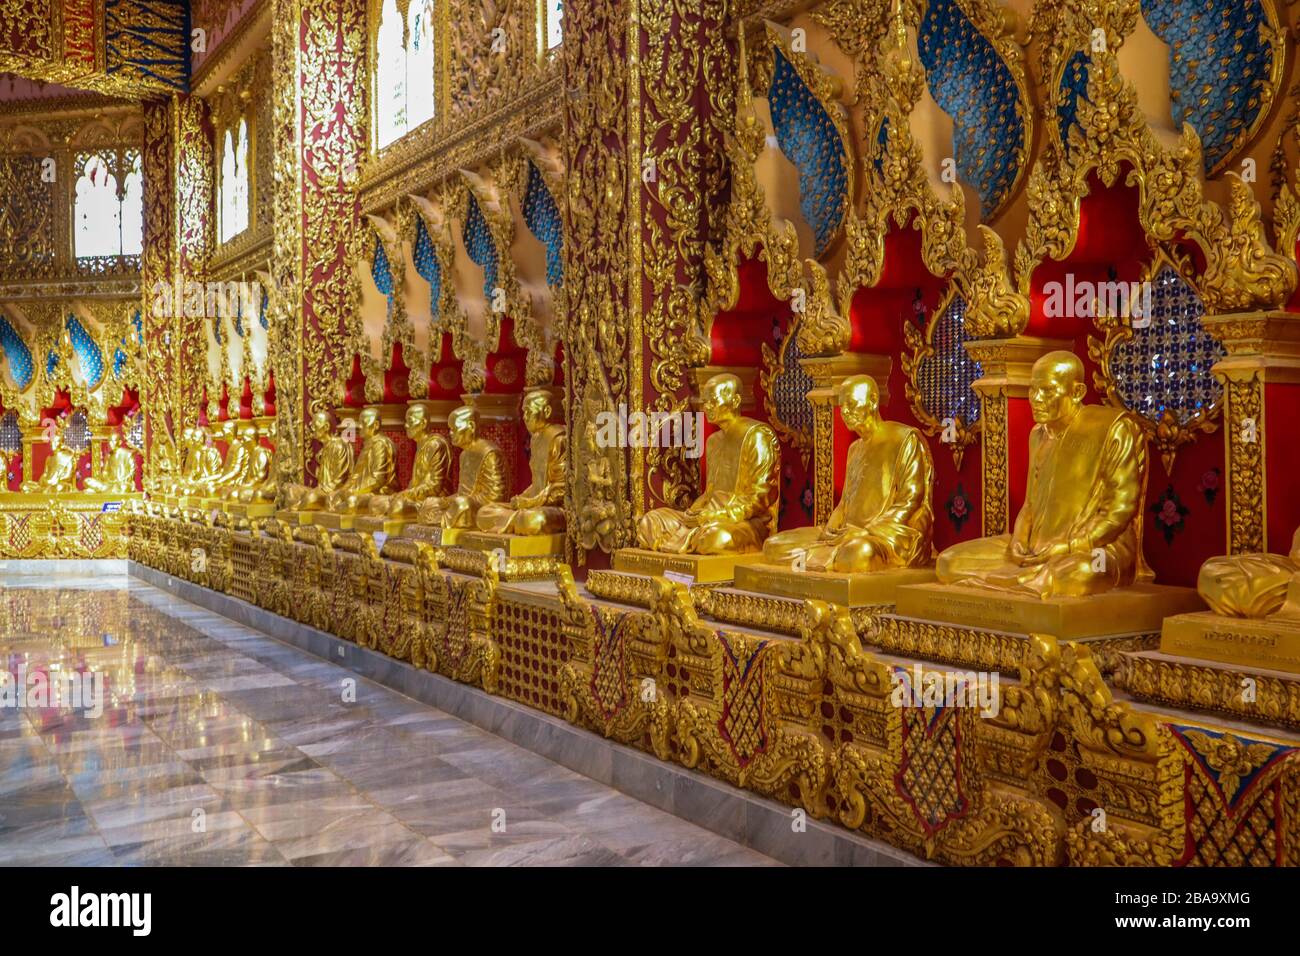 Golden Statues of monks in a Buddhist temple Stock Photo